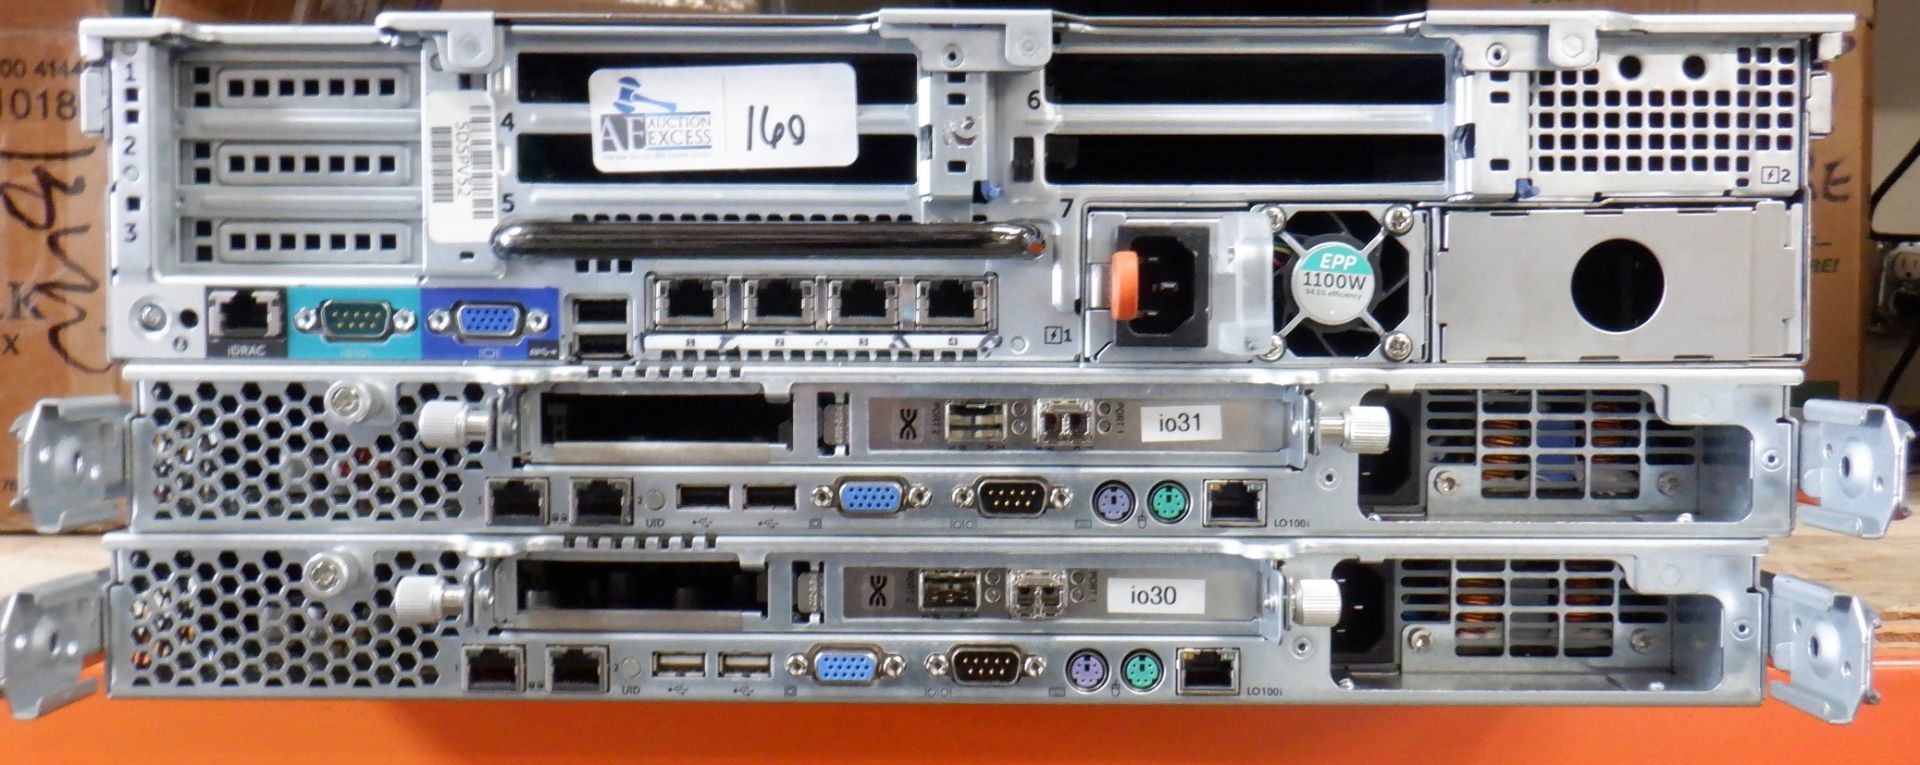 LOT OF 3 SERVERS - Image 2 of 2